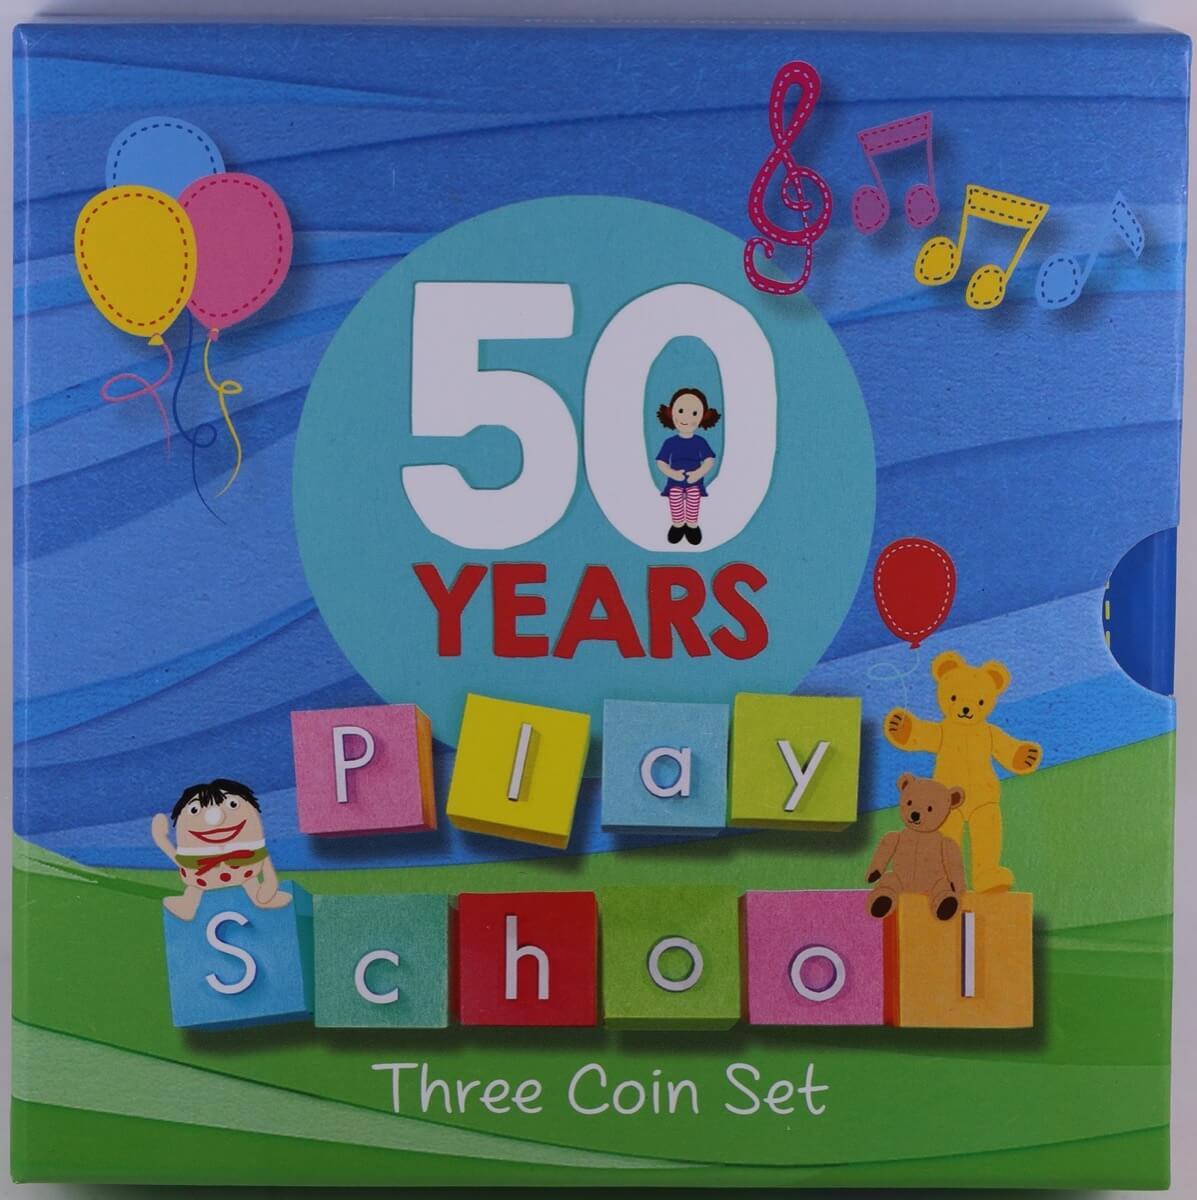 2016 50c 3 Coin Set 50 Years of Play School product image